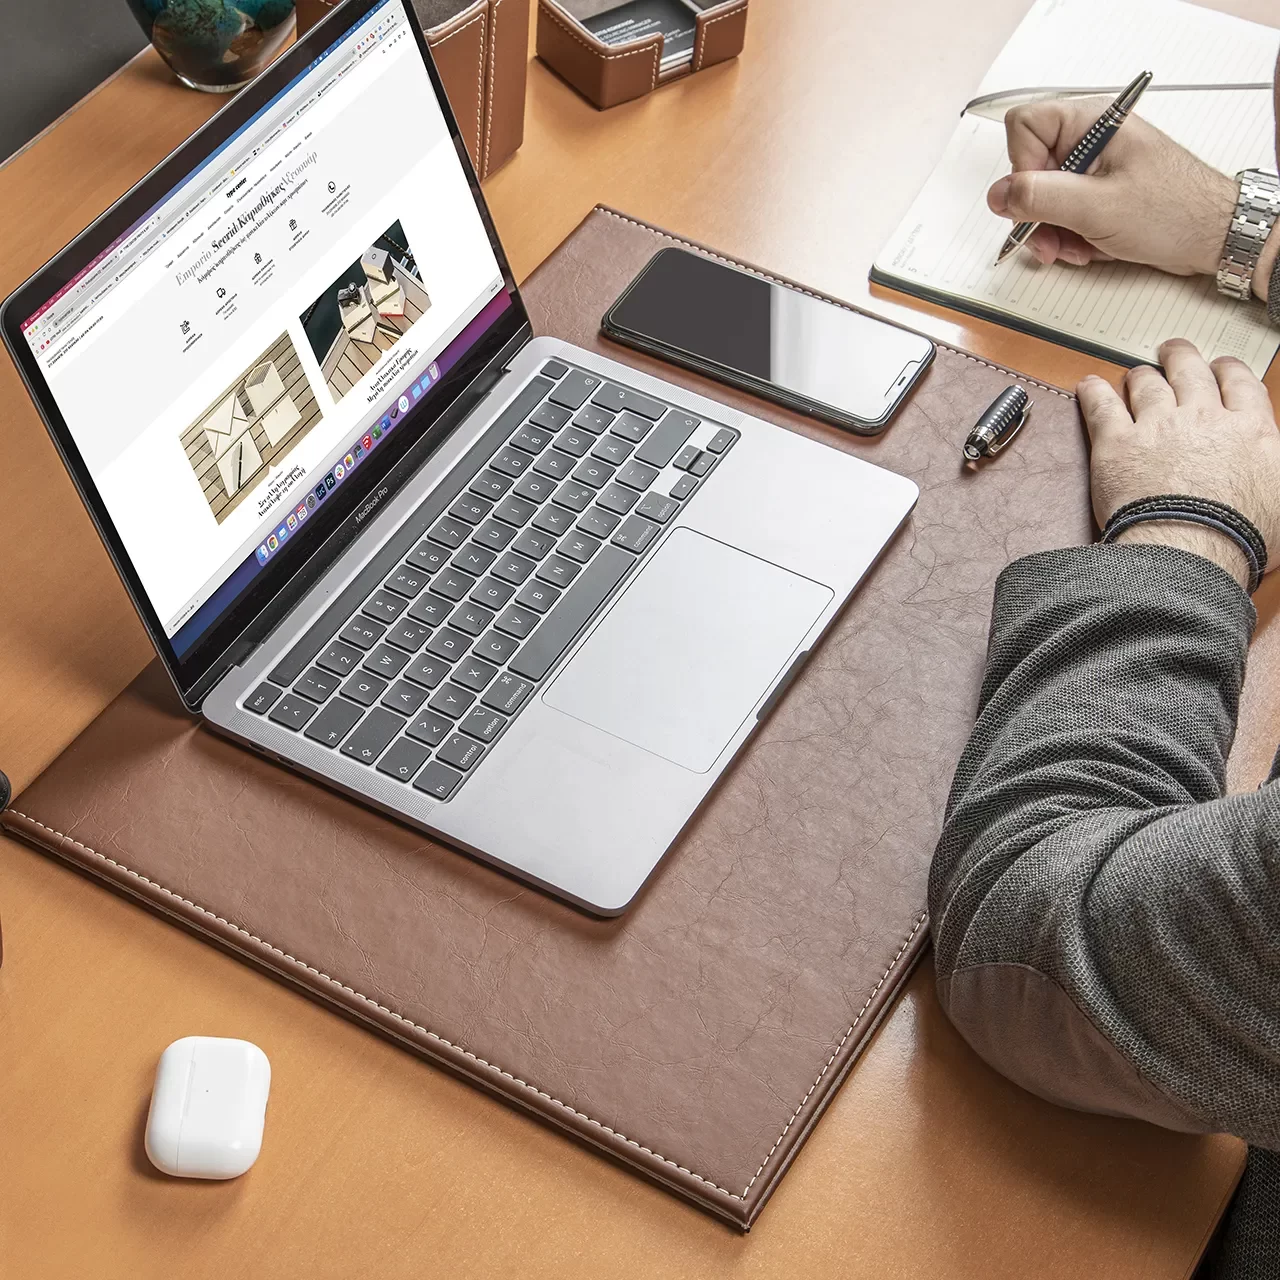 a close up of a wooden desk that on top of it has an open silver laptop that under it has a brown leather deskmate also the desk it has an airpods case a smartphone also there is hands that rest on the desk and also write on a notebook